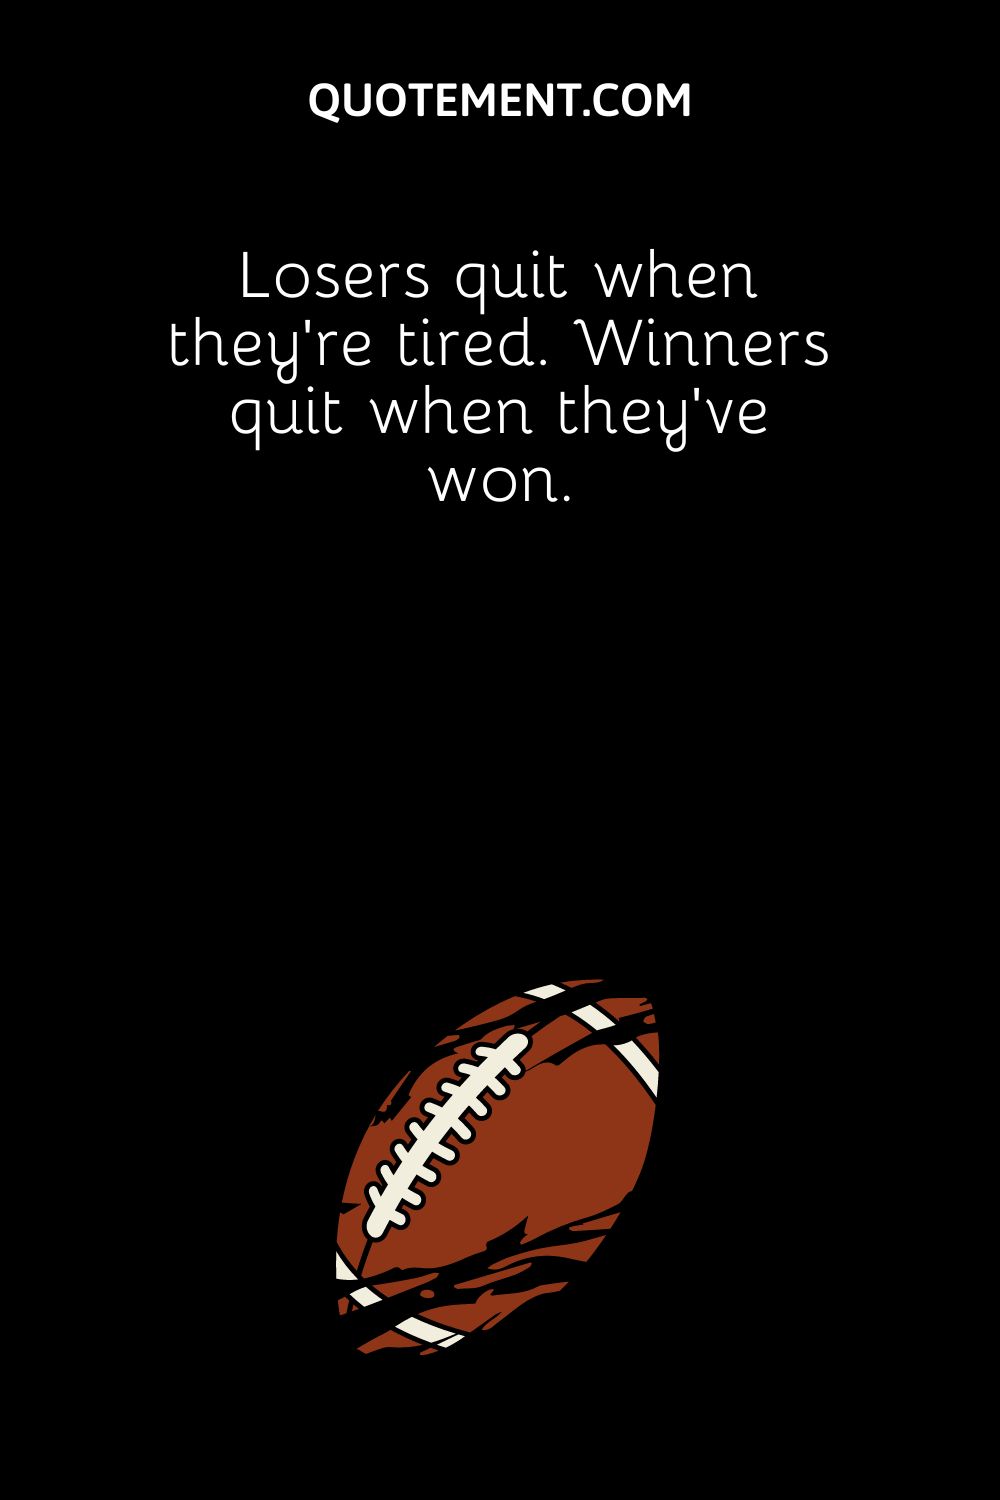 Losers quit when they’re tired